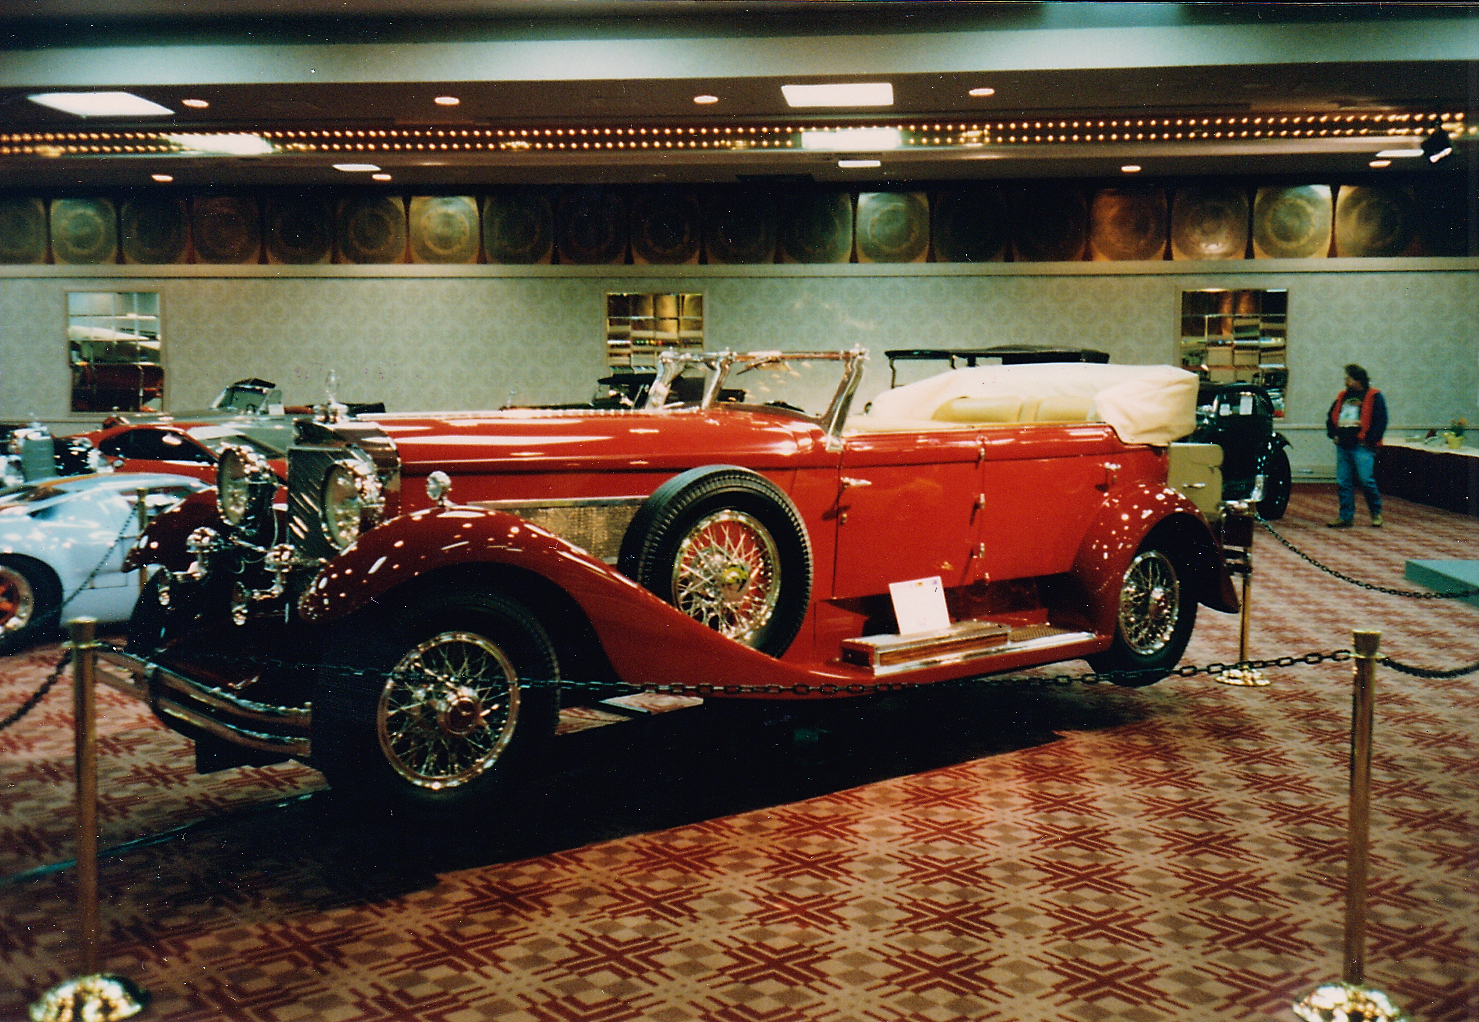 The large red open car looks like a Duesenberg, but I believe it was a Mercedes (check the grille).